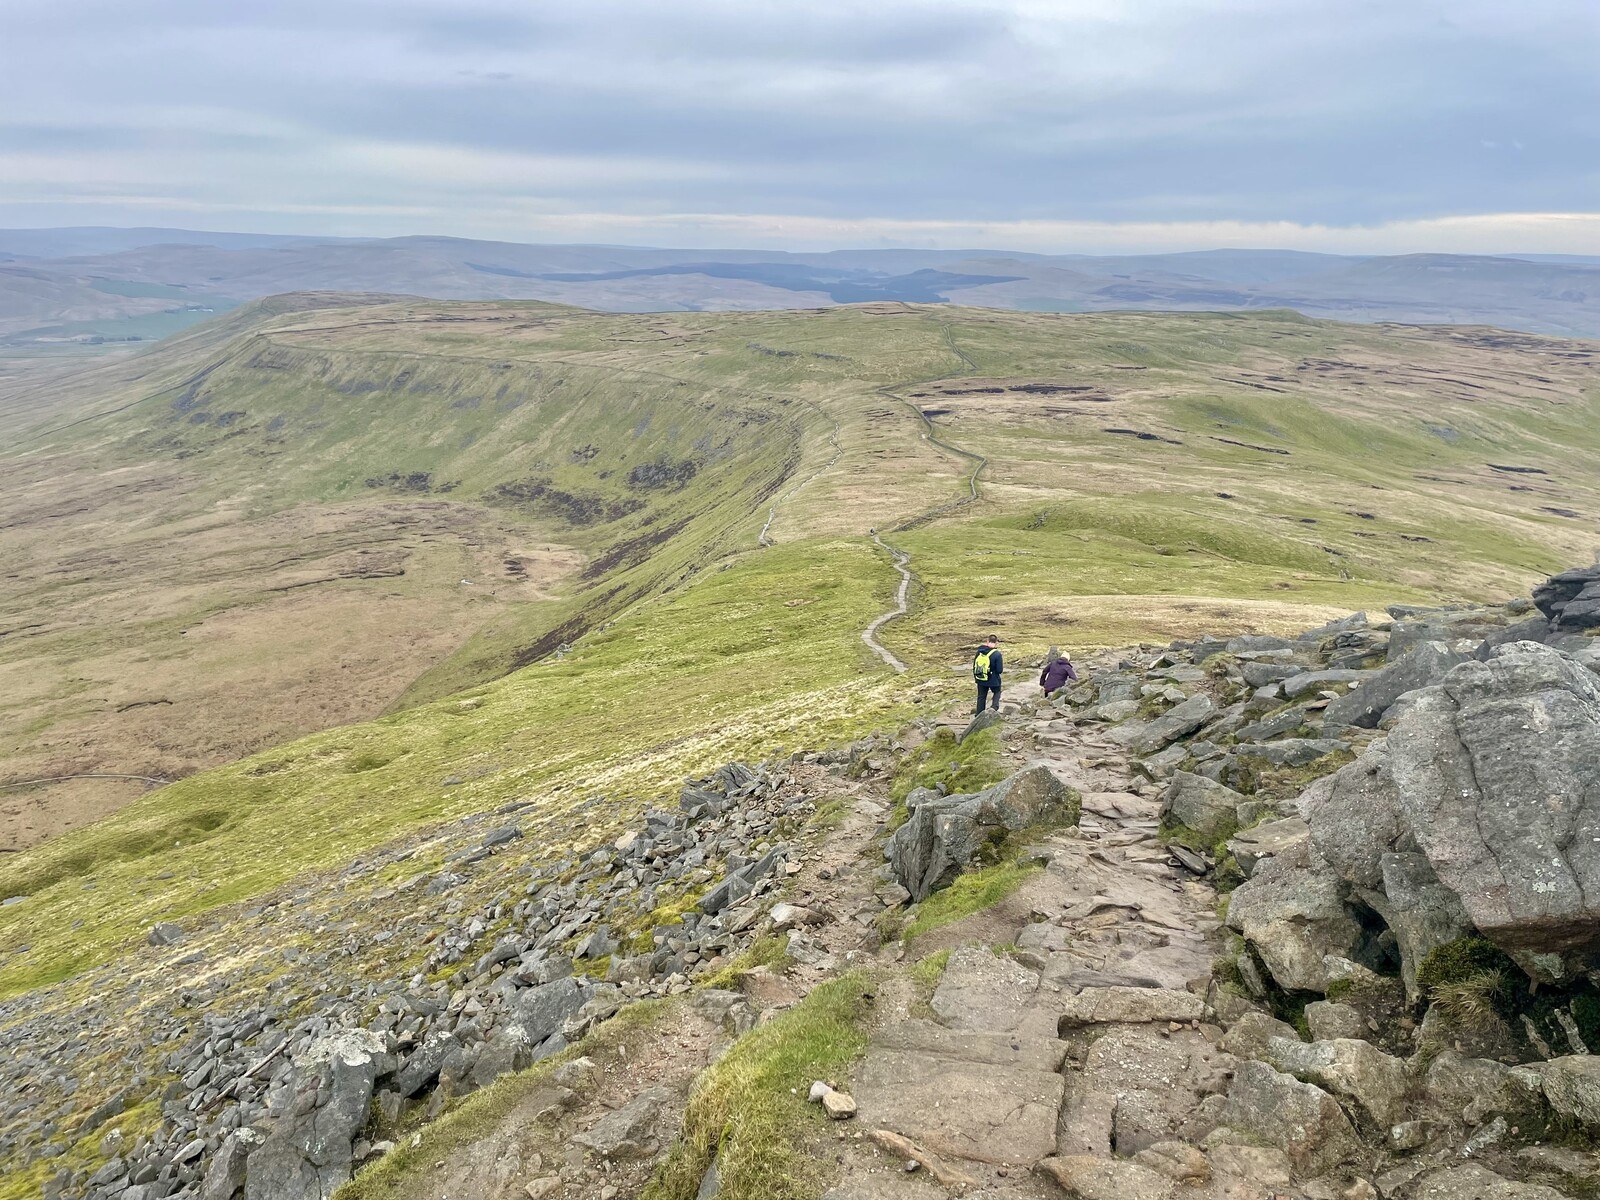 The stony trail leading down the side of Ingleborough, disappearing into a broad plateau in the distance and dropping off precipitously to the left